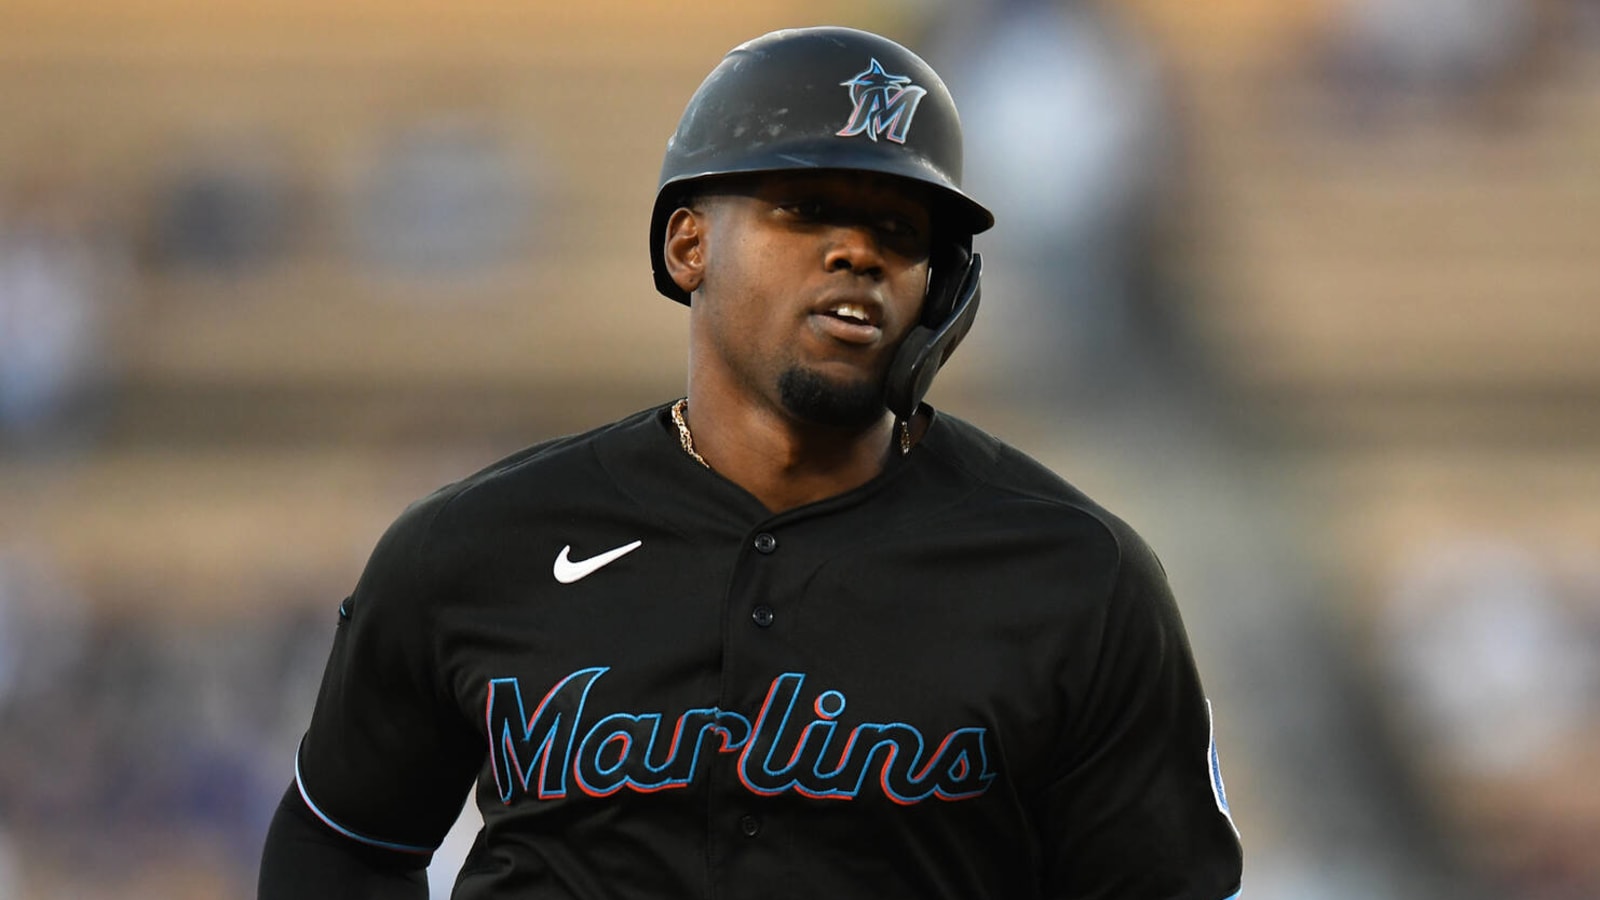 Miami Marlins injury: Jorge Soler likely done for season